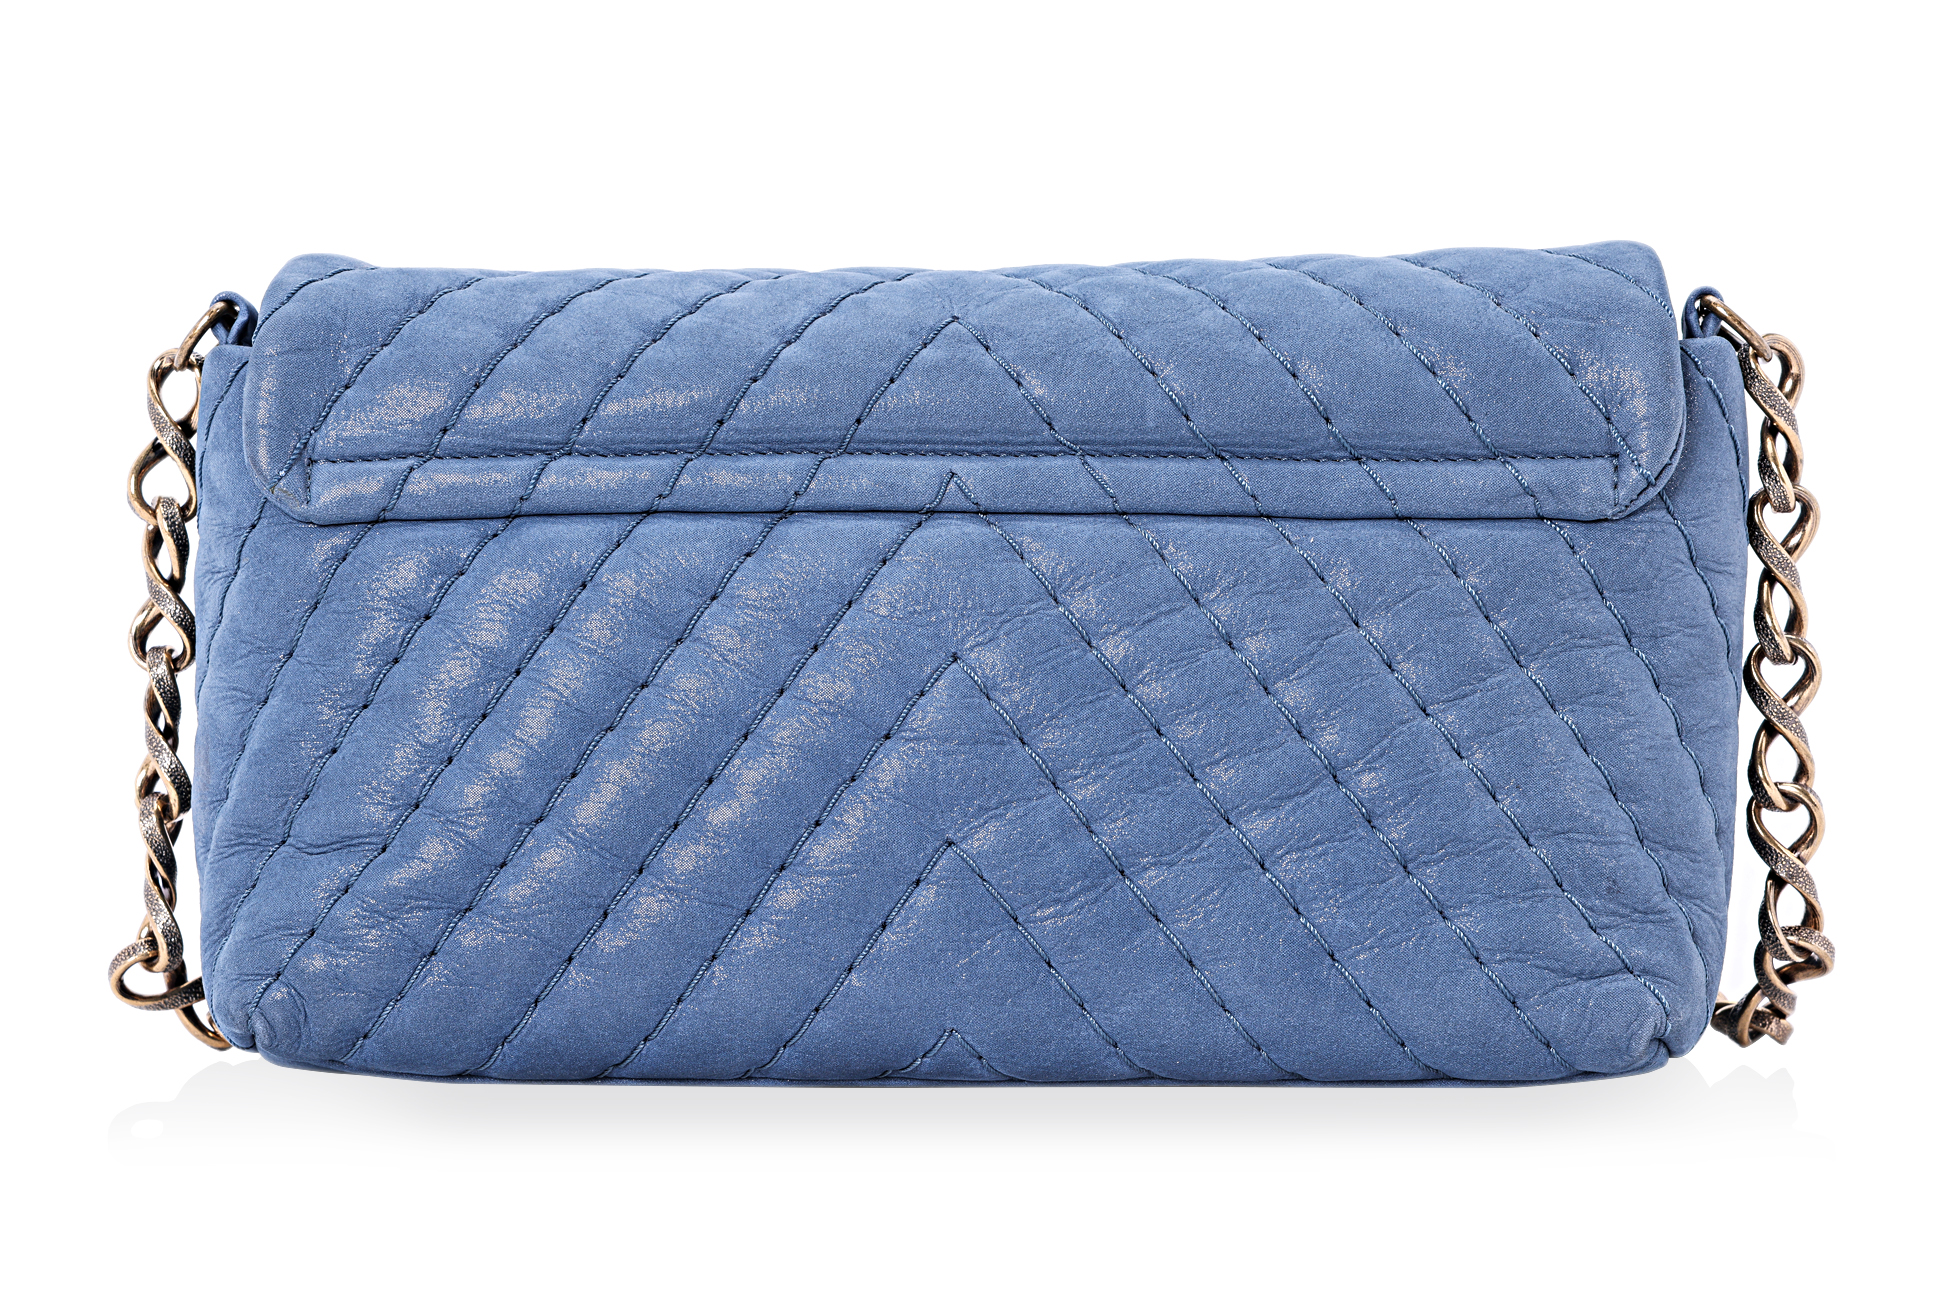 A CHANEL BLUE CHEVRON QUILTED FLAP BAG - Image 2 of 9